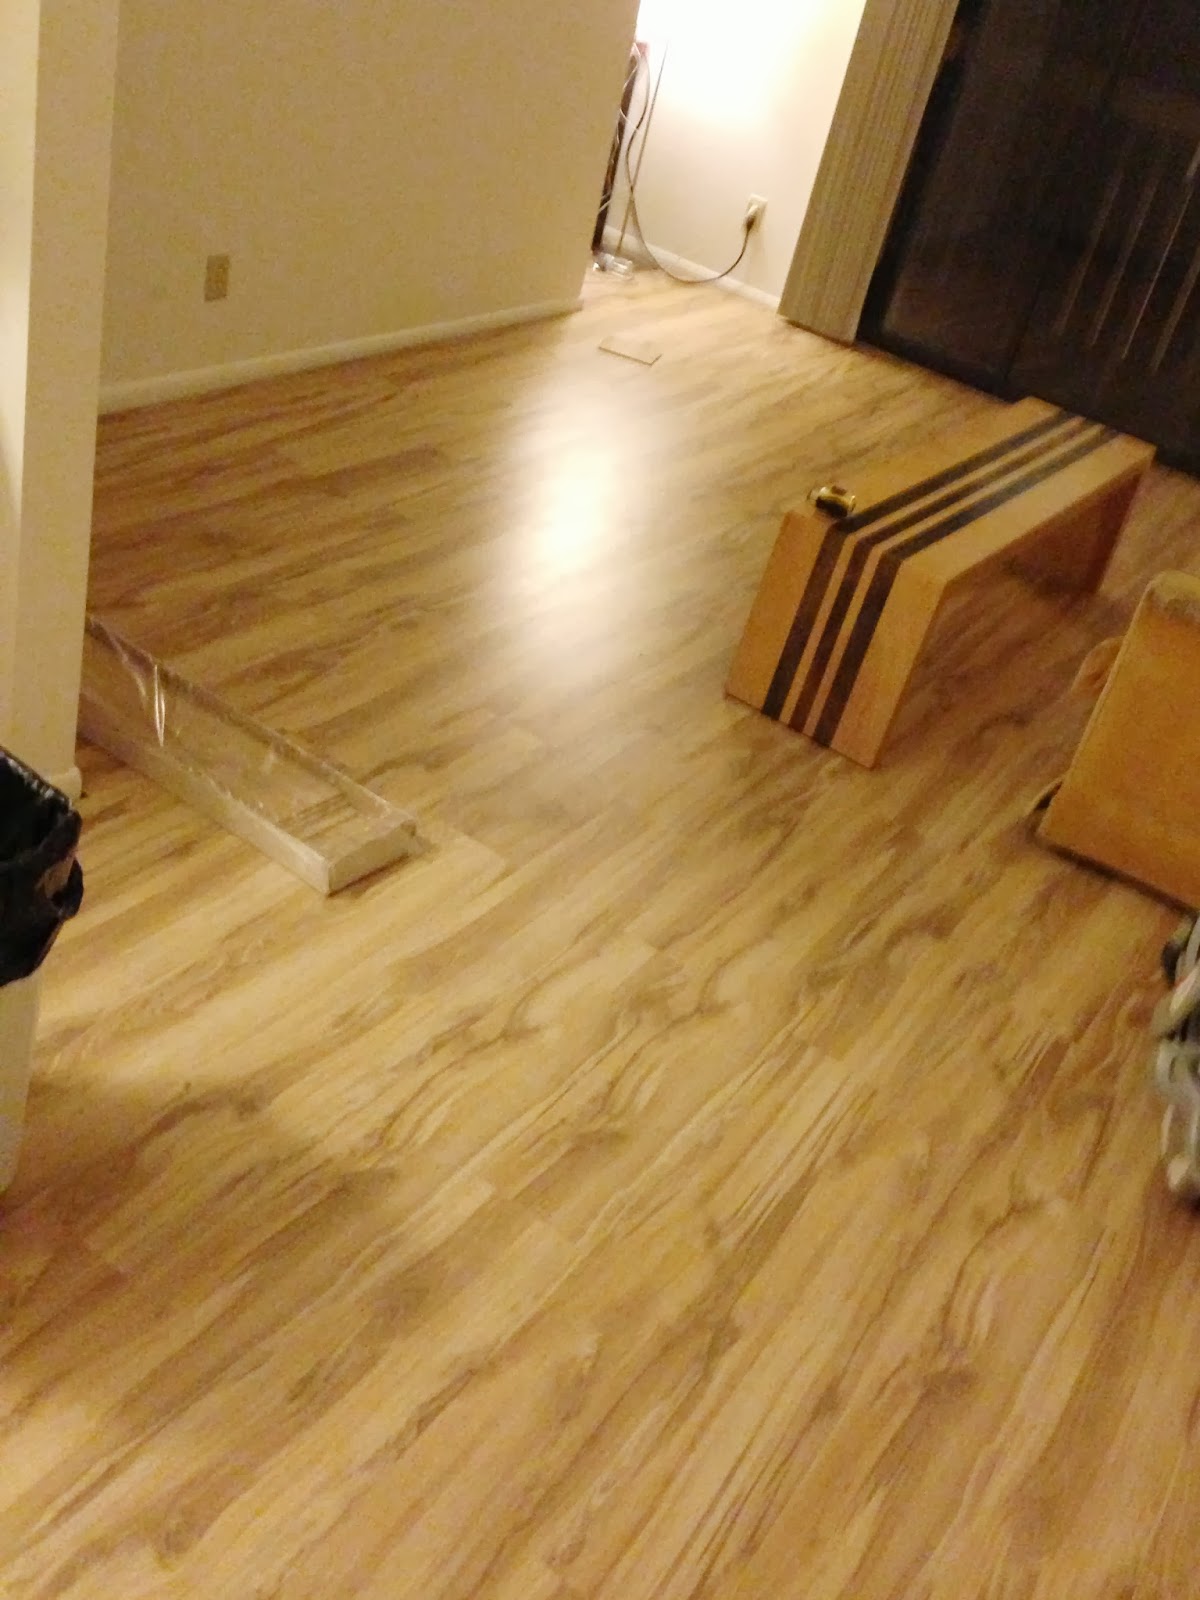 How We Put Hardwood Over Carpet Messymom, Can You Fit Laminate Flooring Over Carpet